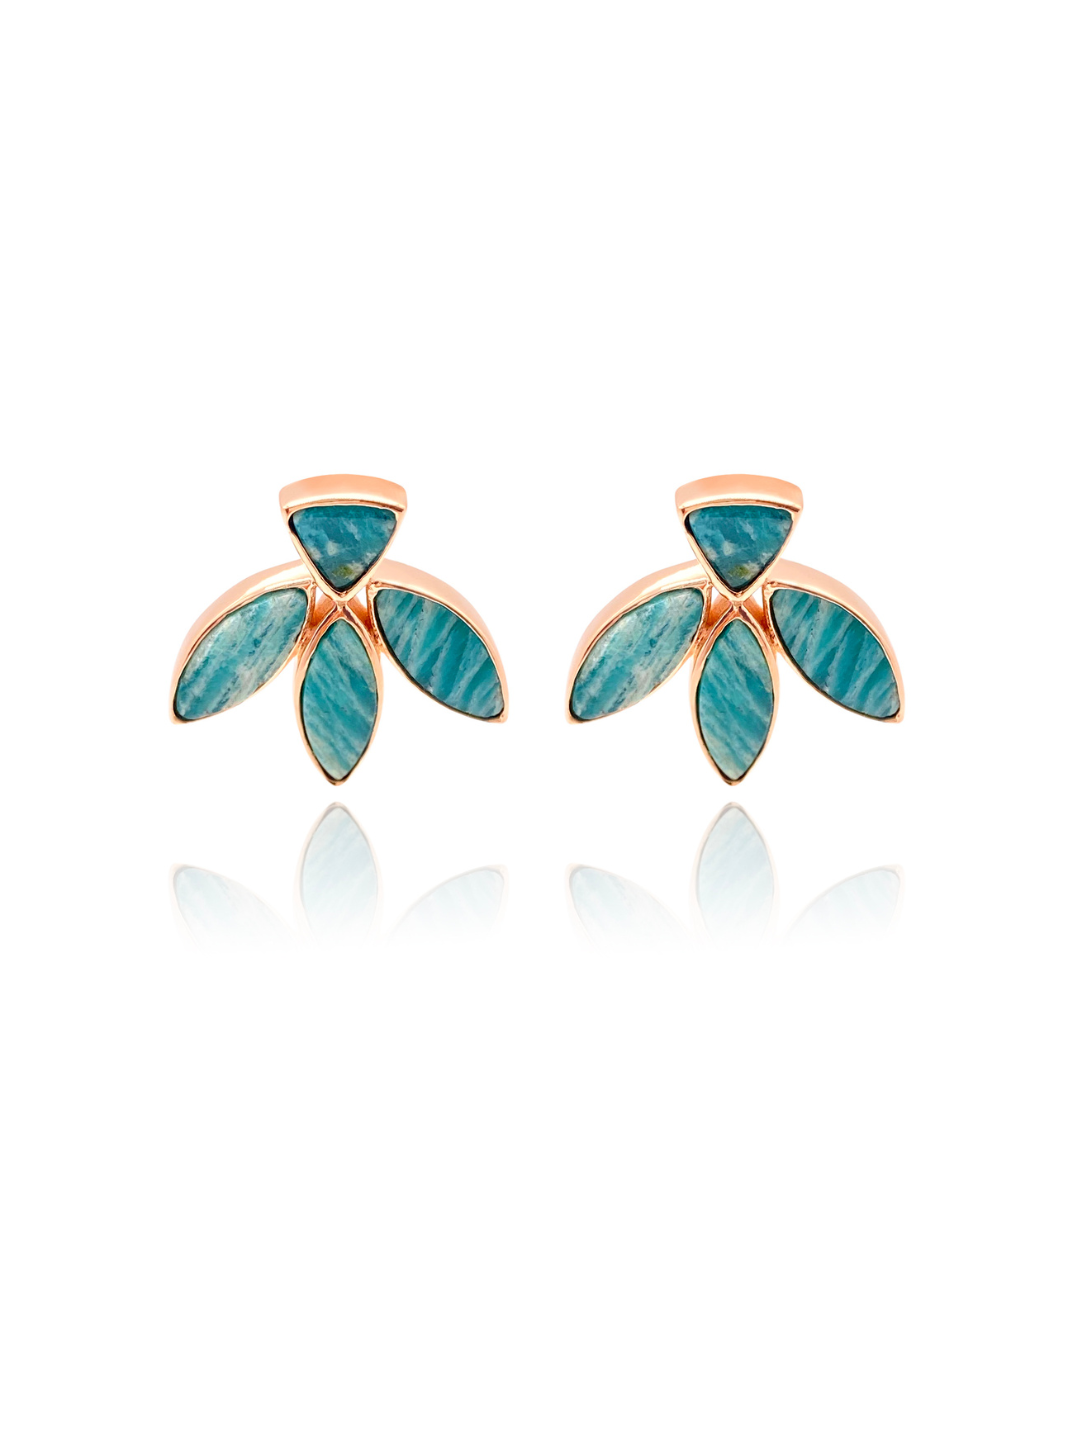 Rose gold vermeil floral escape earrings inlaid with hand cut amazonite. These earrings are exquisitely designed and inspired by nature and the inlaid floral stones found in Indian mosaics. ethical jewelry fashion